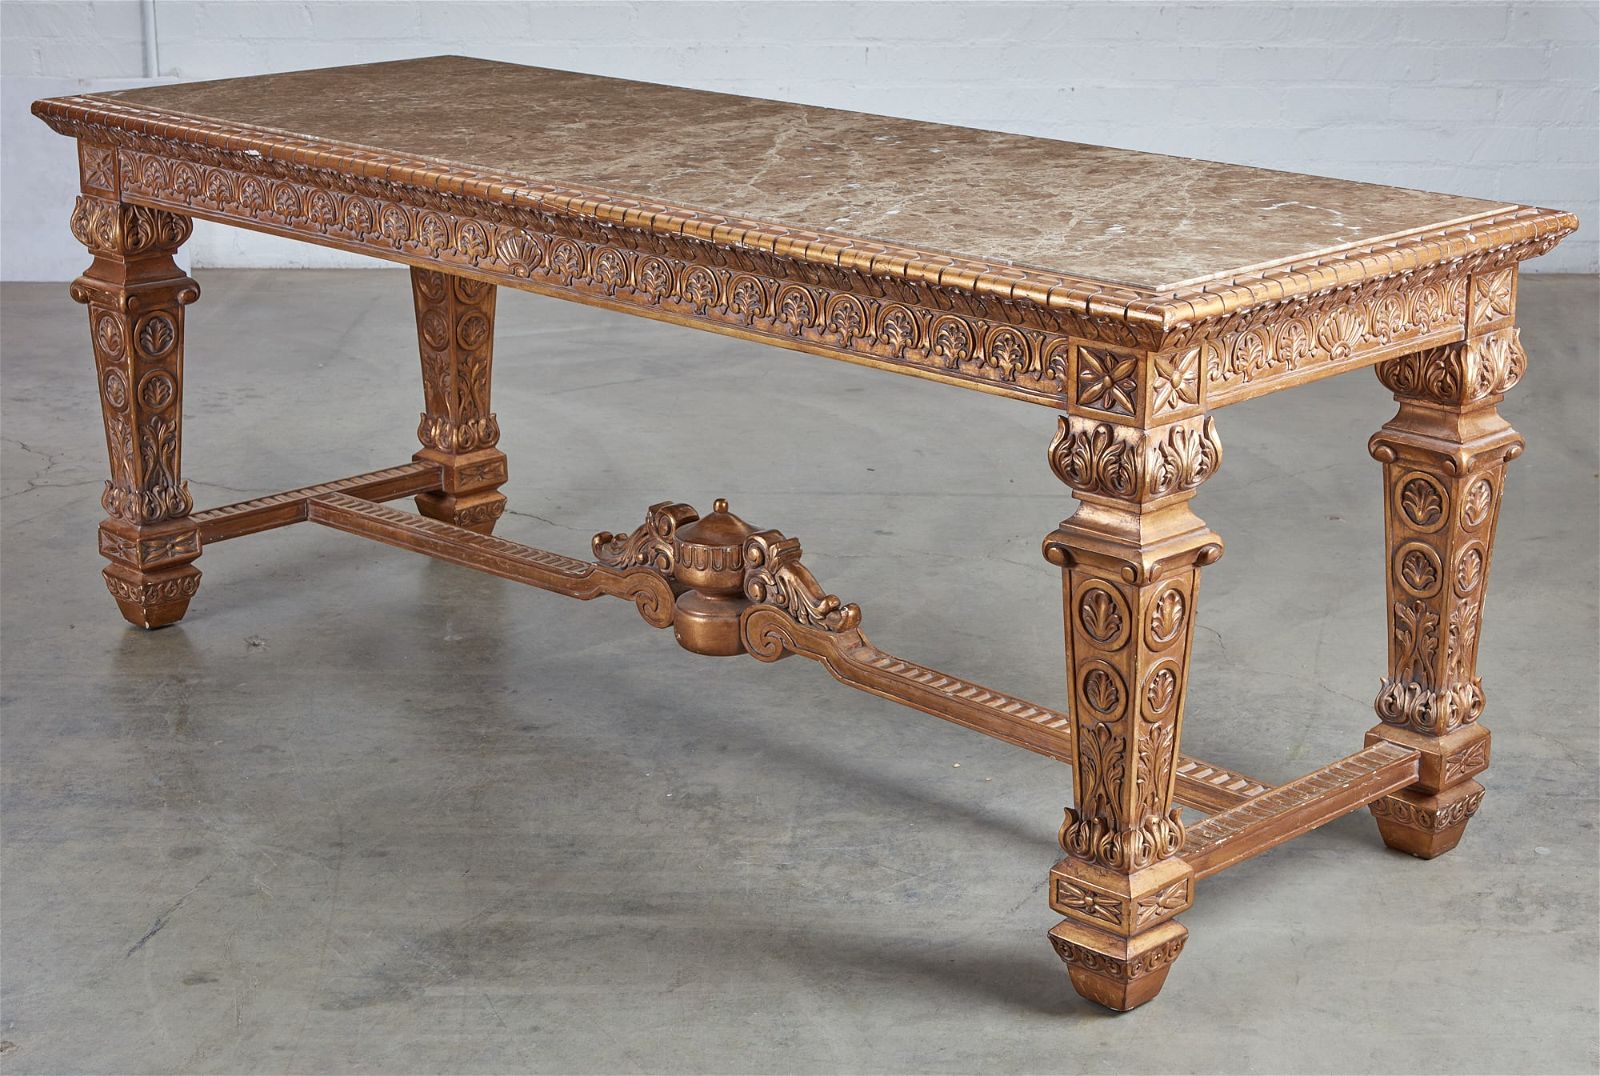 A BAROQUE STYLE GILTWOOD TABLE  2fb3a2a